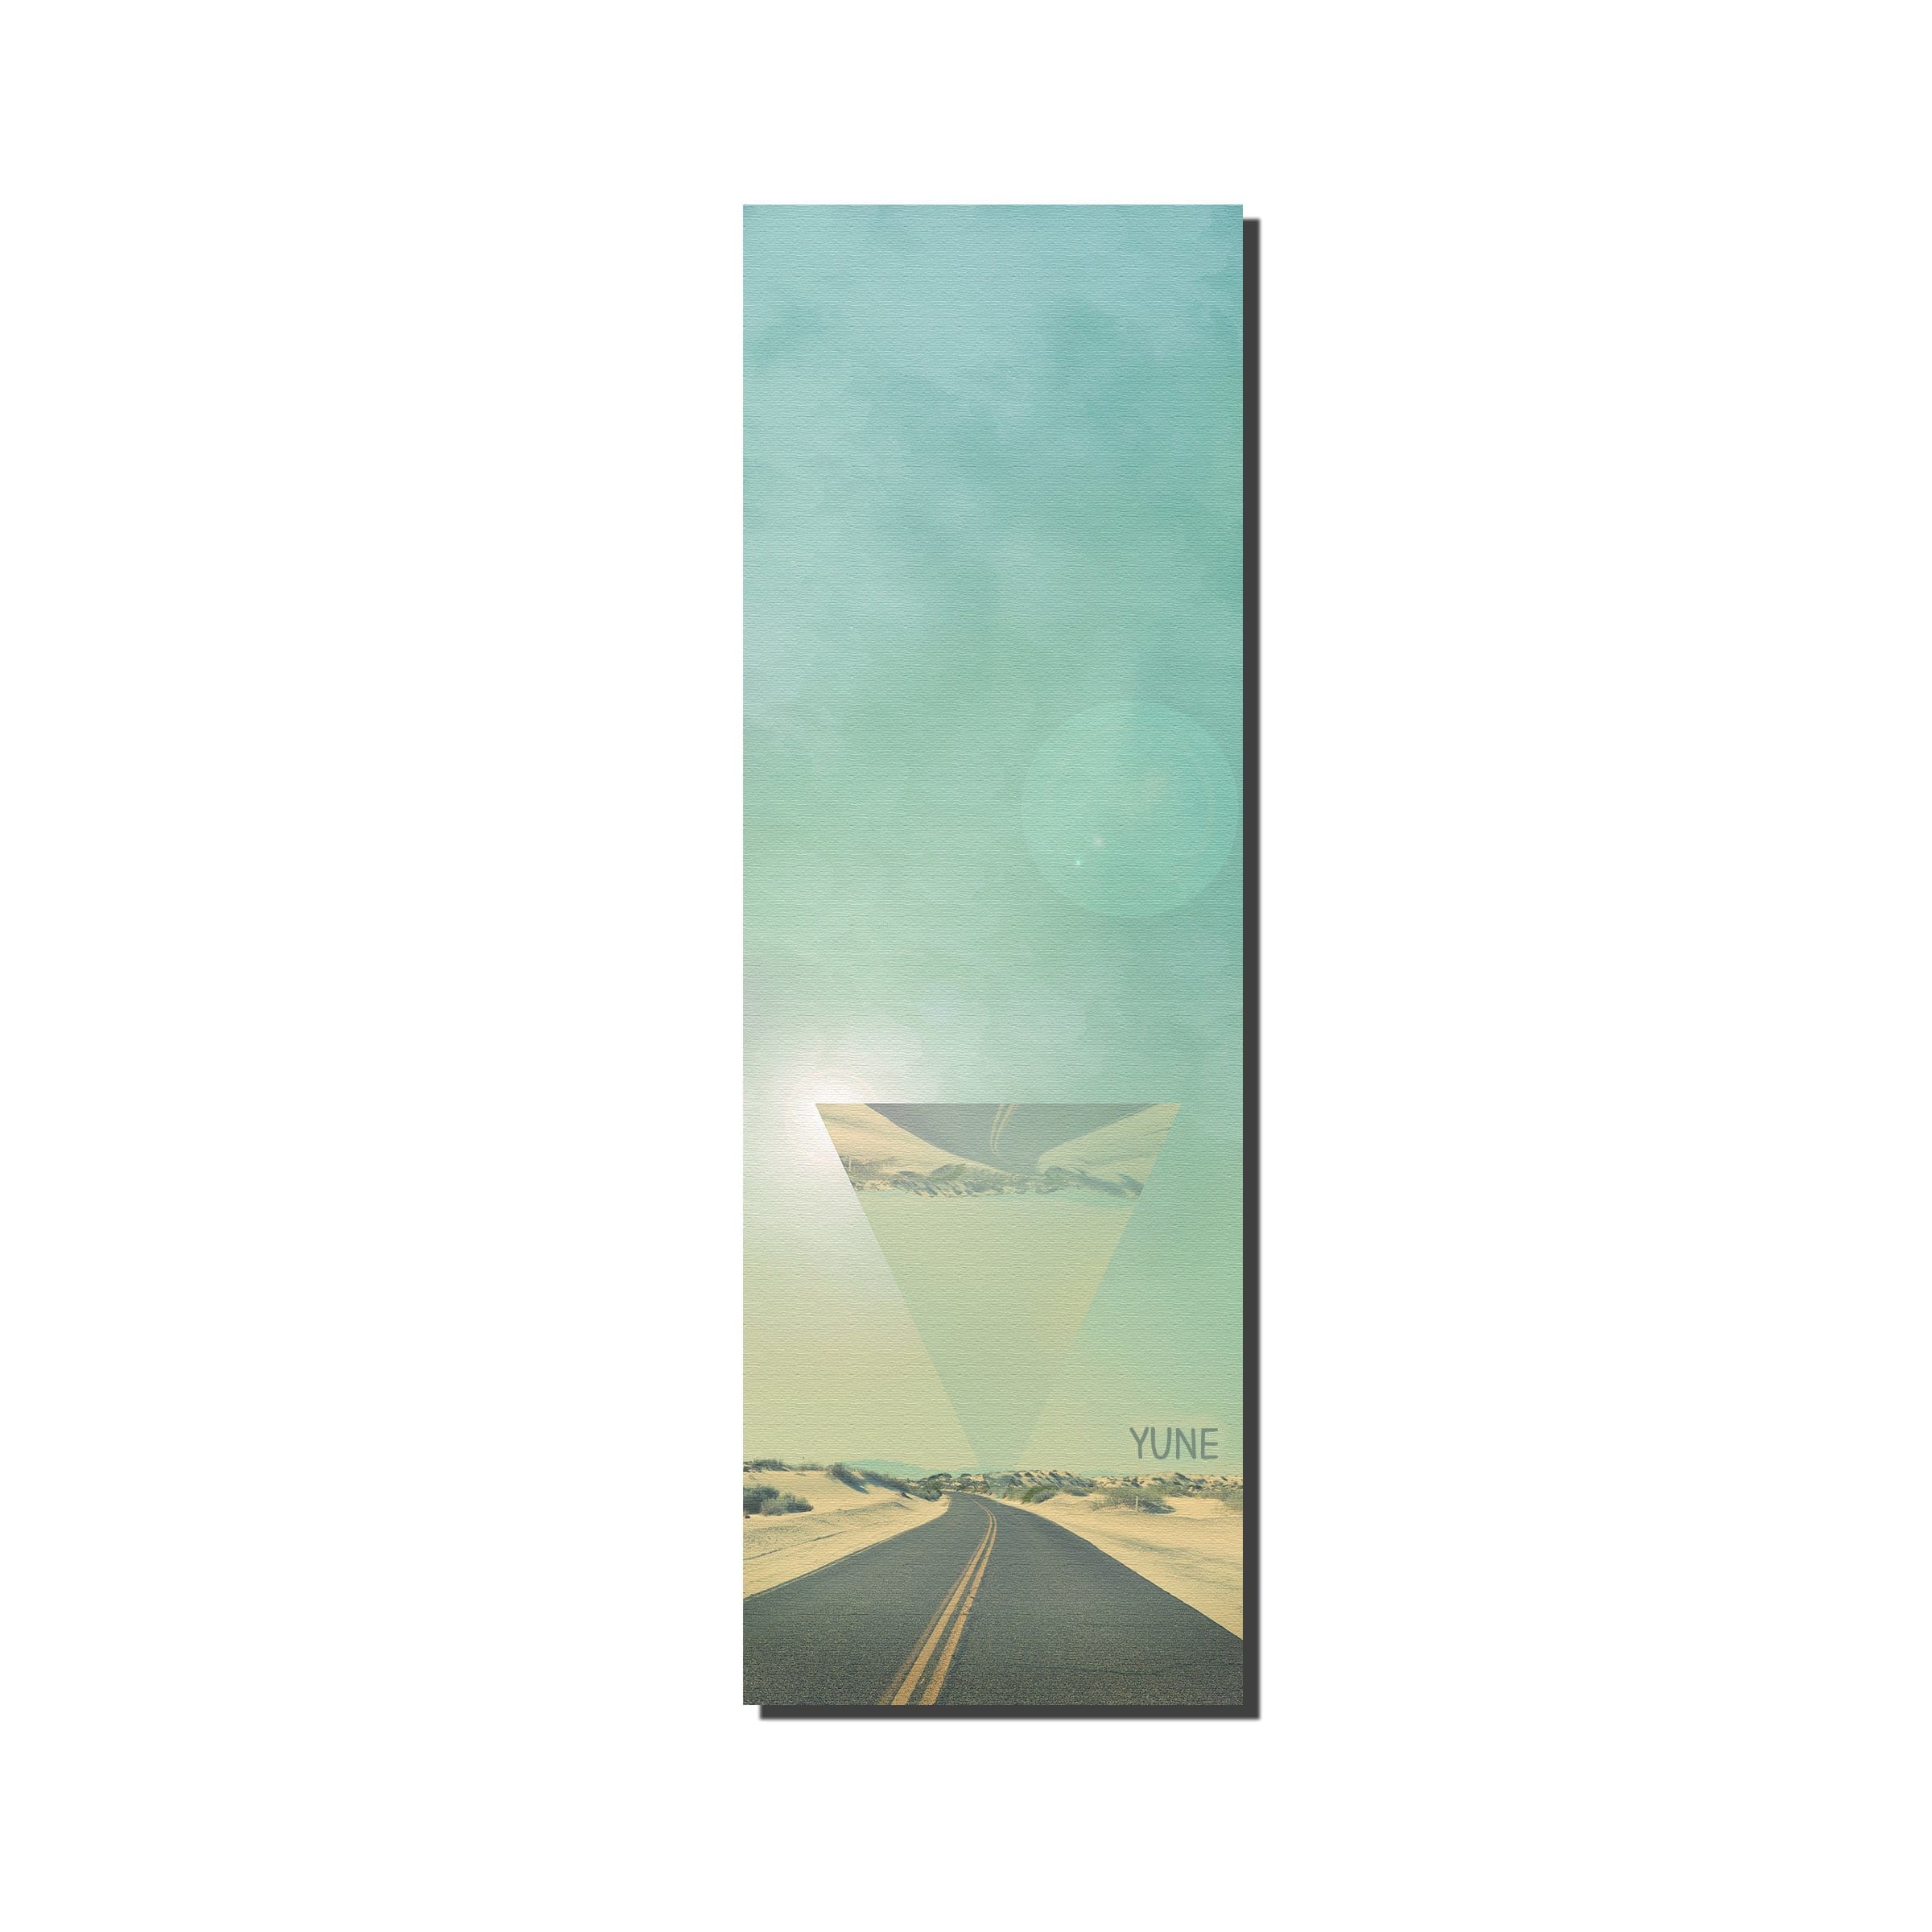 The Sycamore Yoga Mat - Yoga Mat - Yeti Yoga Co. - cotton, excercise, fitness, fitness product, health